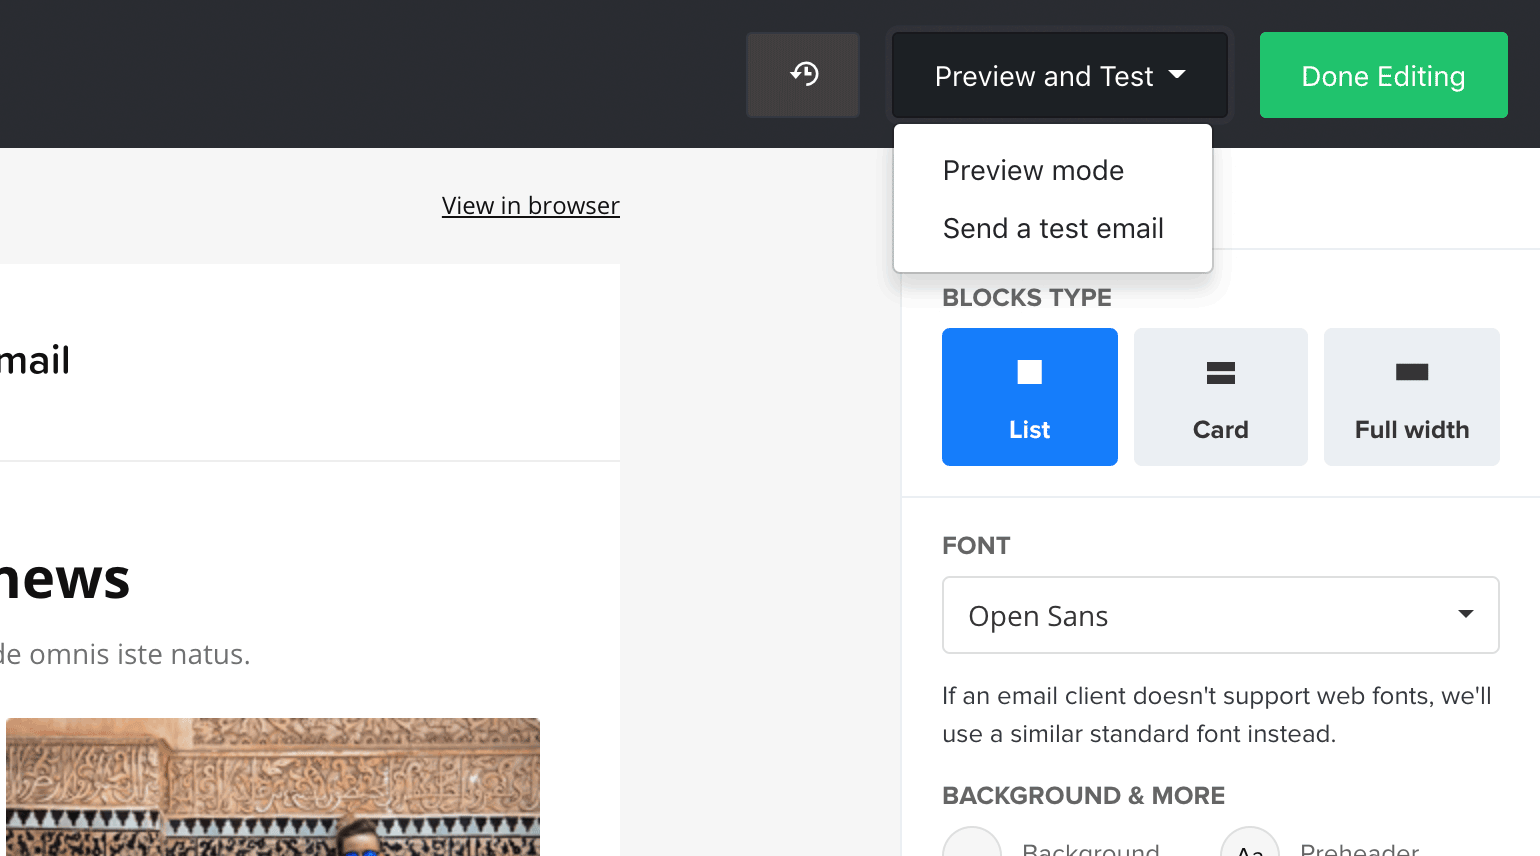 New Drag & Drop Editor email testing